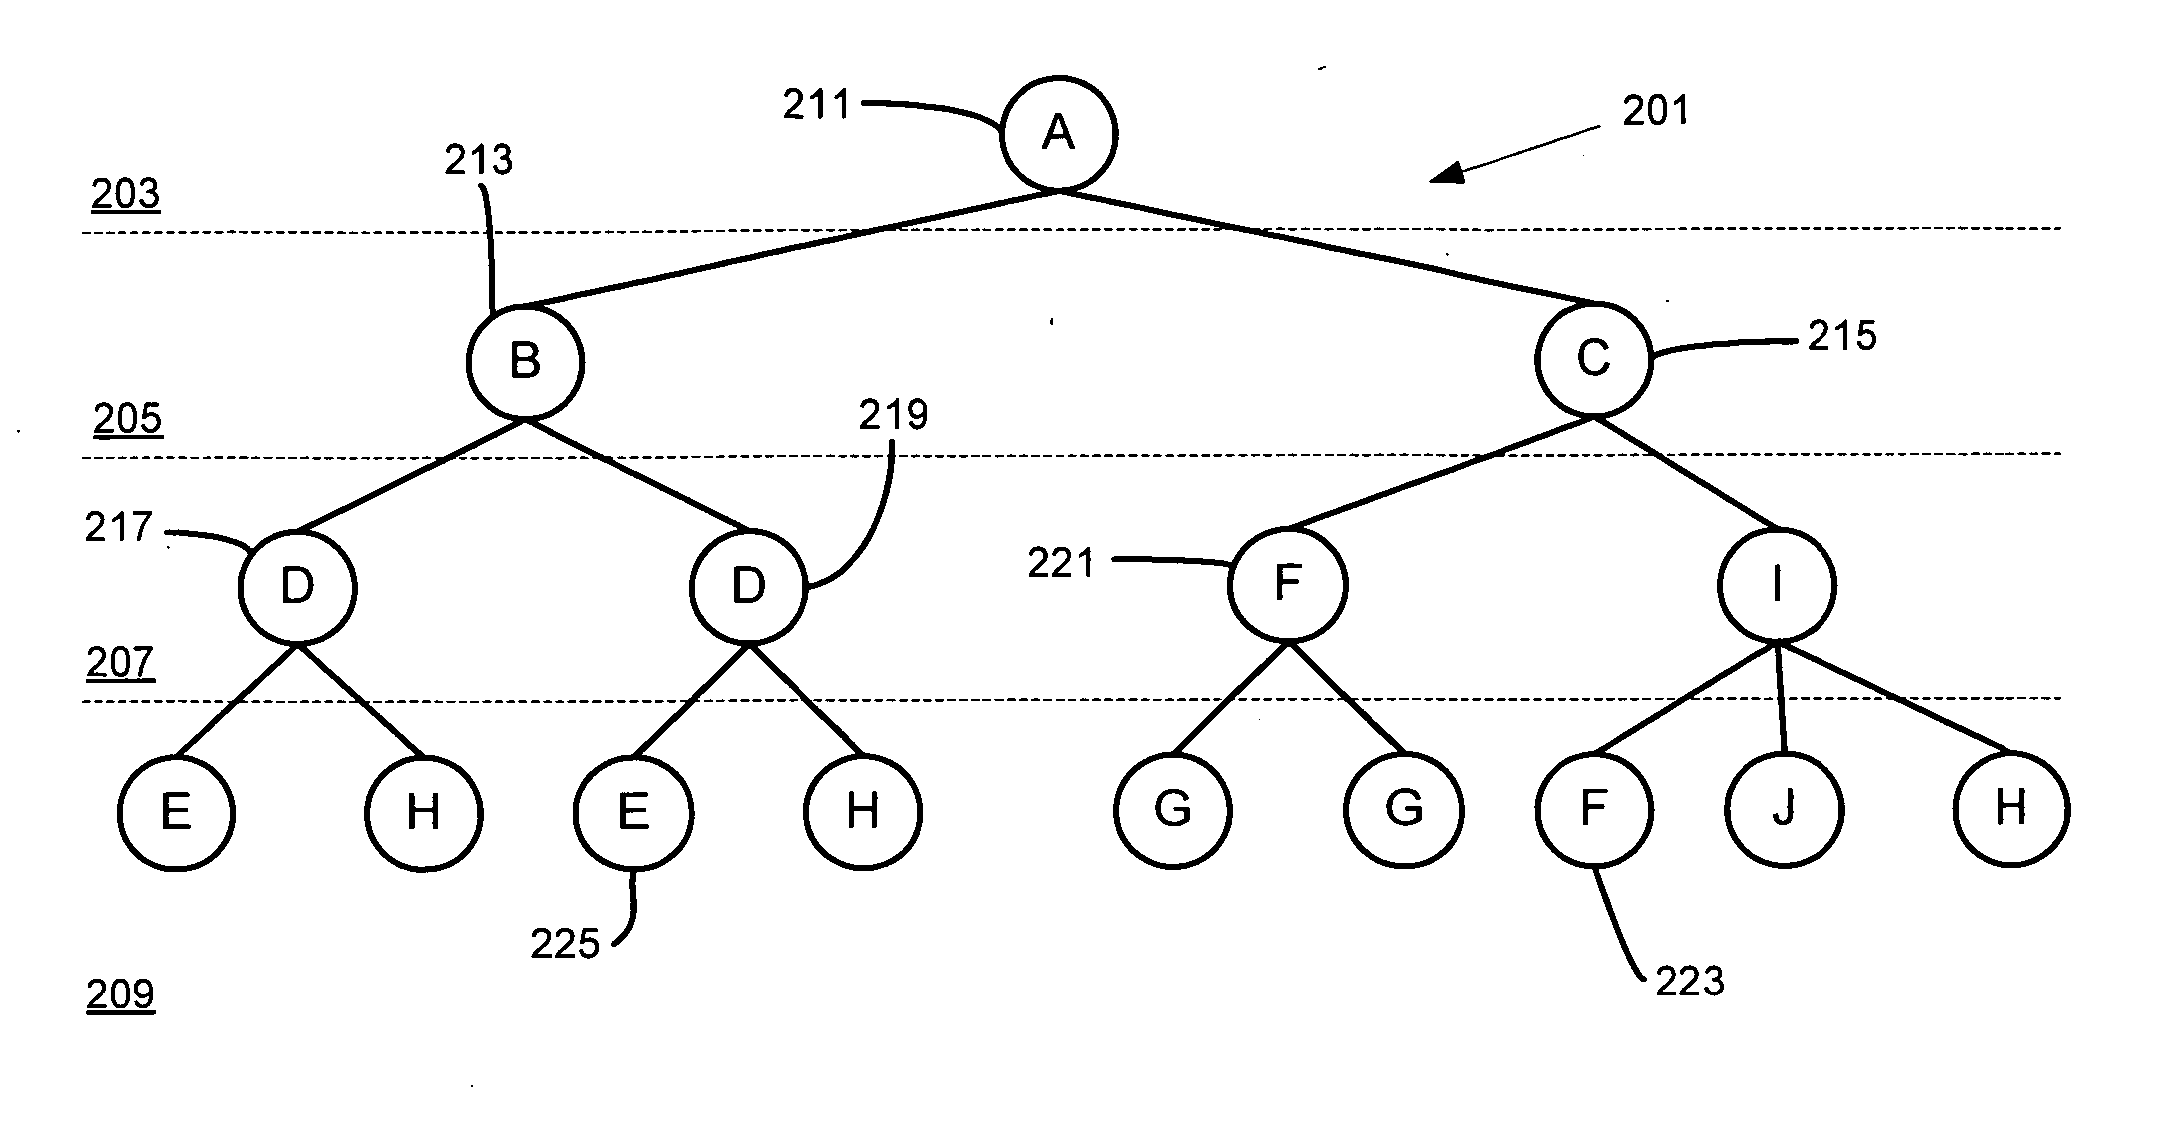 Distribution of parallel operations